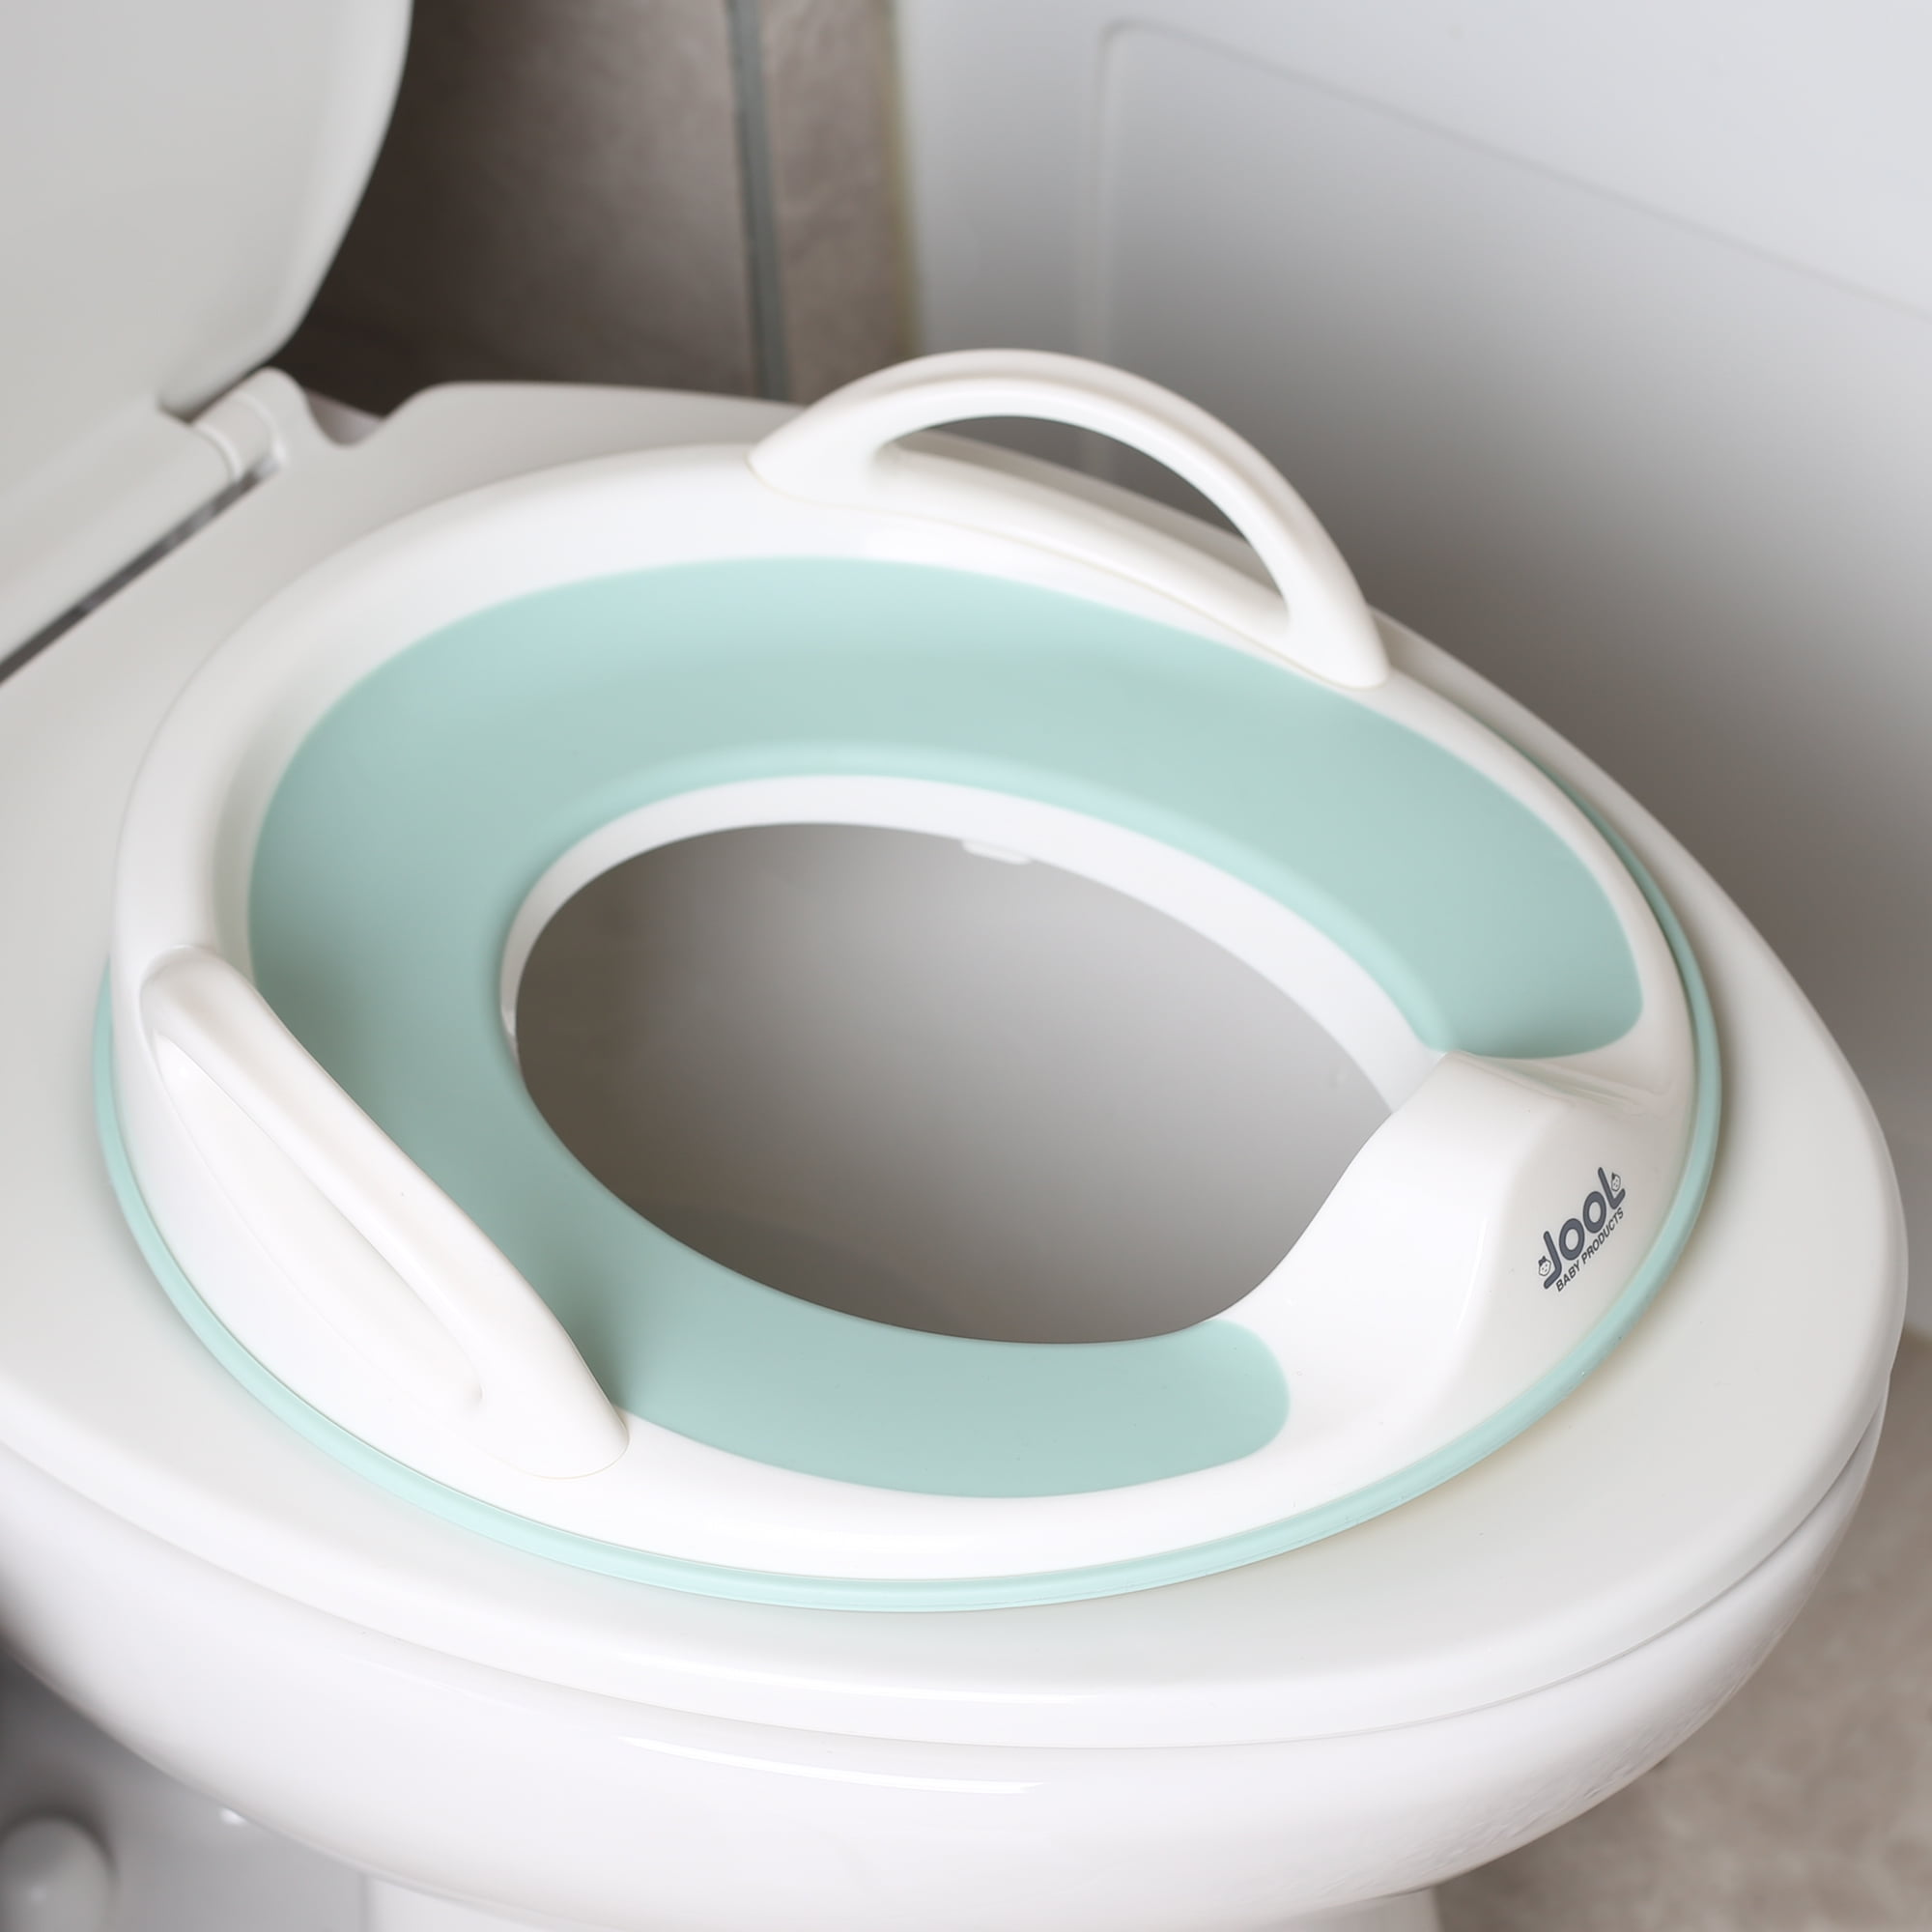 KIDS SOFT PADDED TOILET POTTY TRAINING SEAT CHILDREN BABY SEAT TODDLER REMOVABLE 